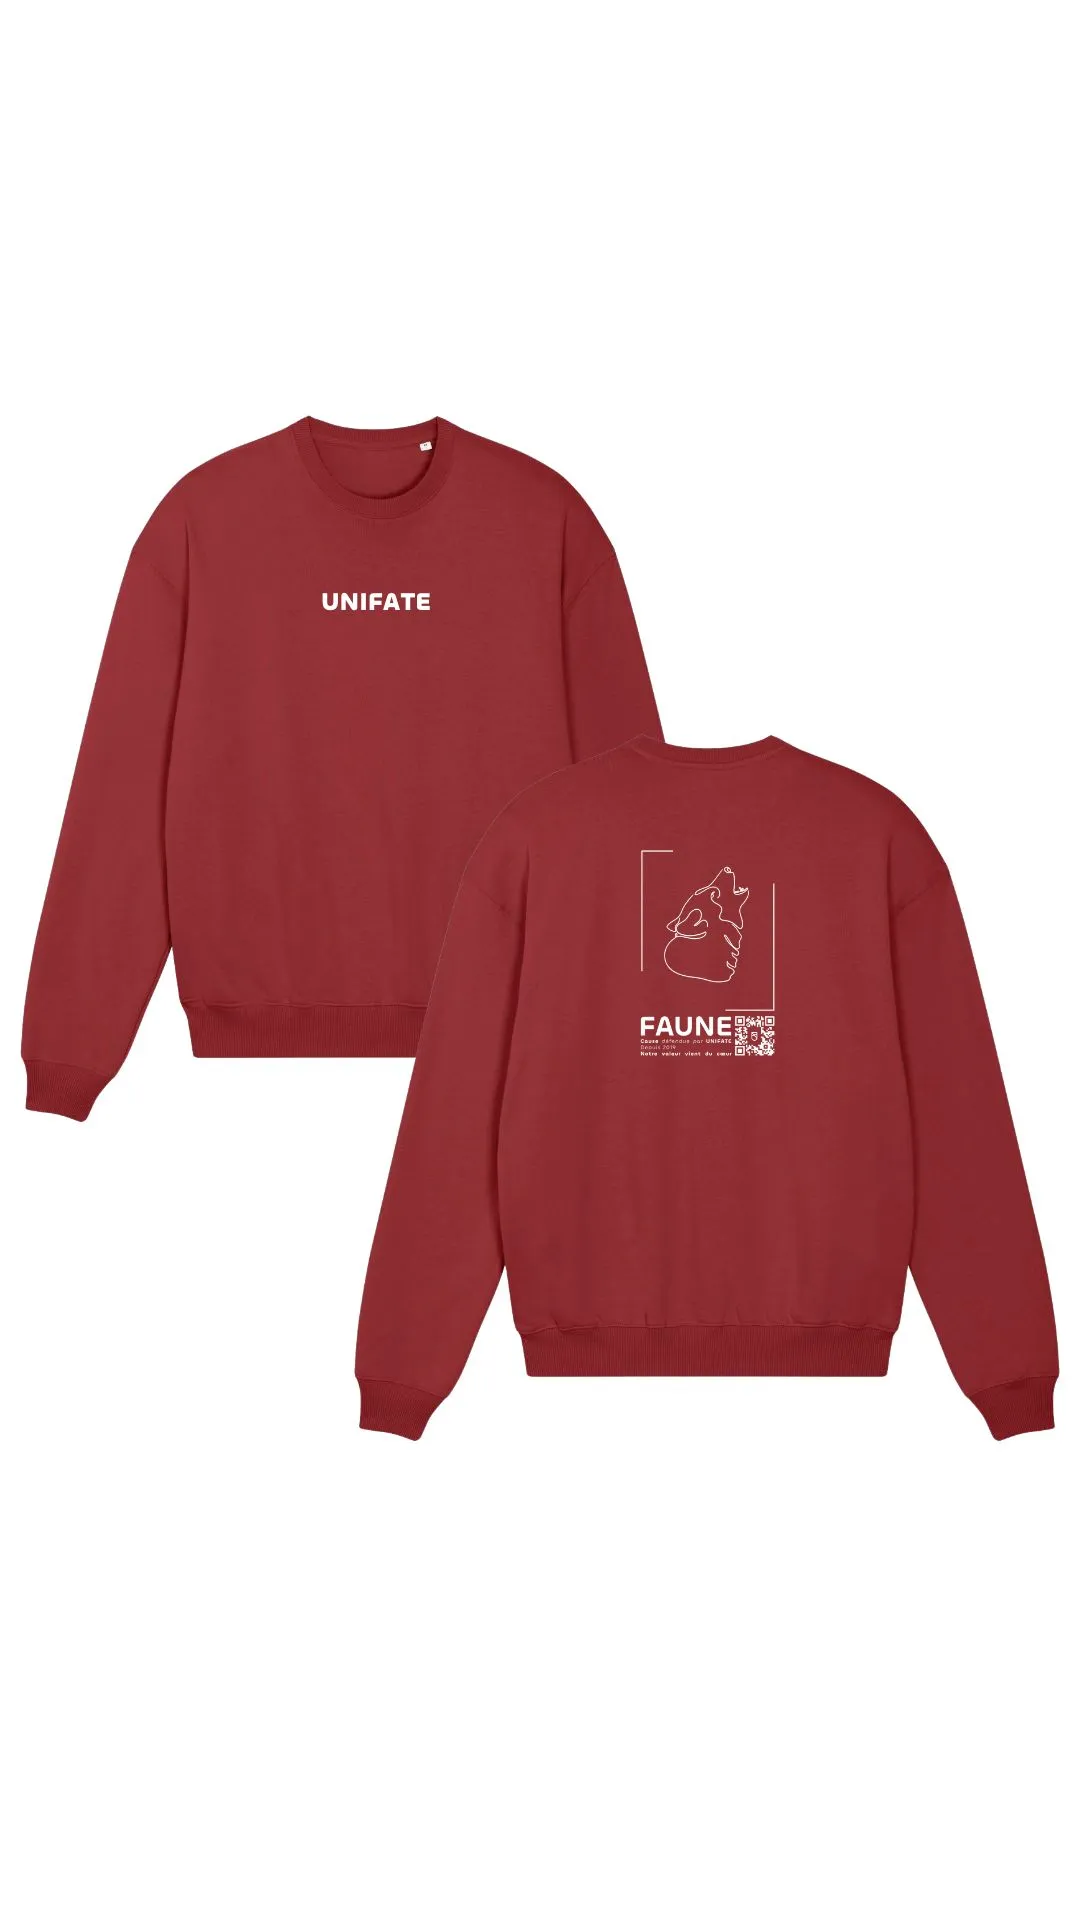 unifate-marque-responsable-rennes-collection-faune-ete-sweat-rouge